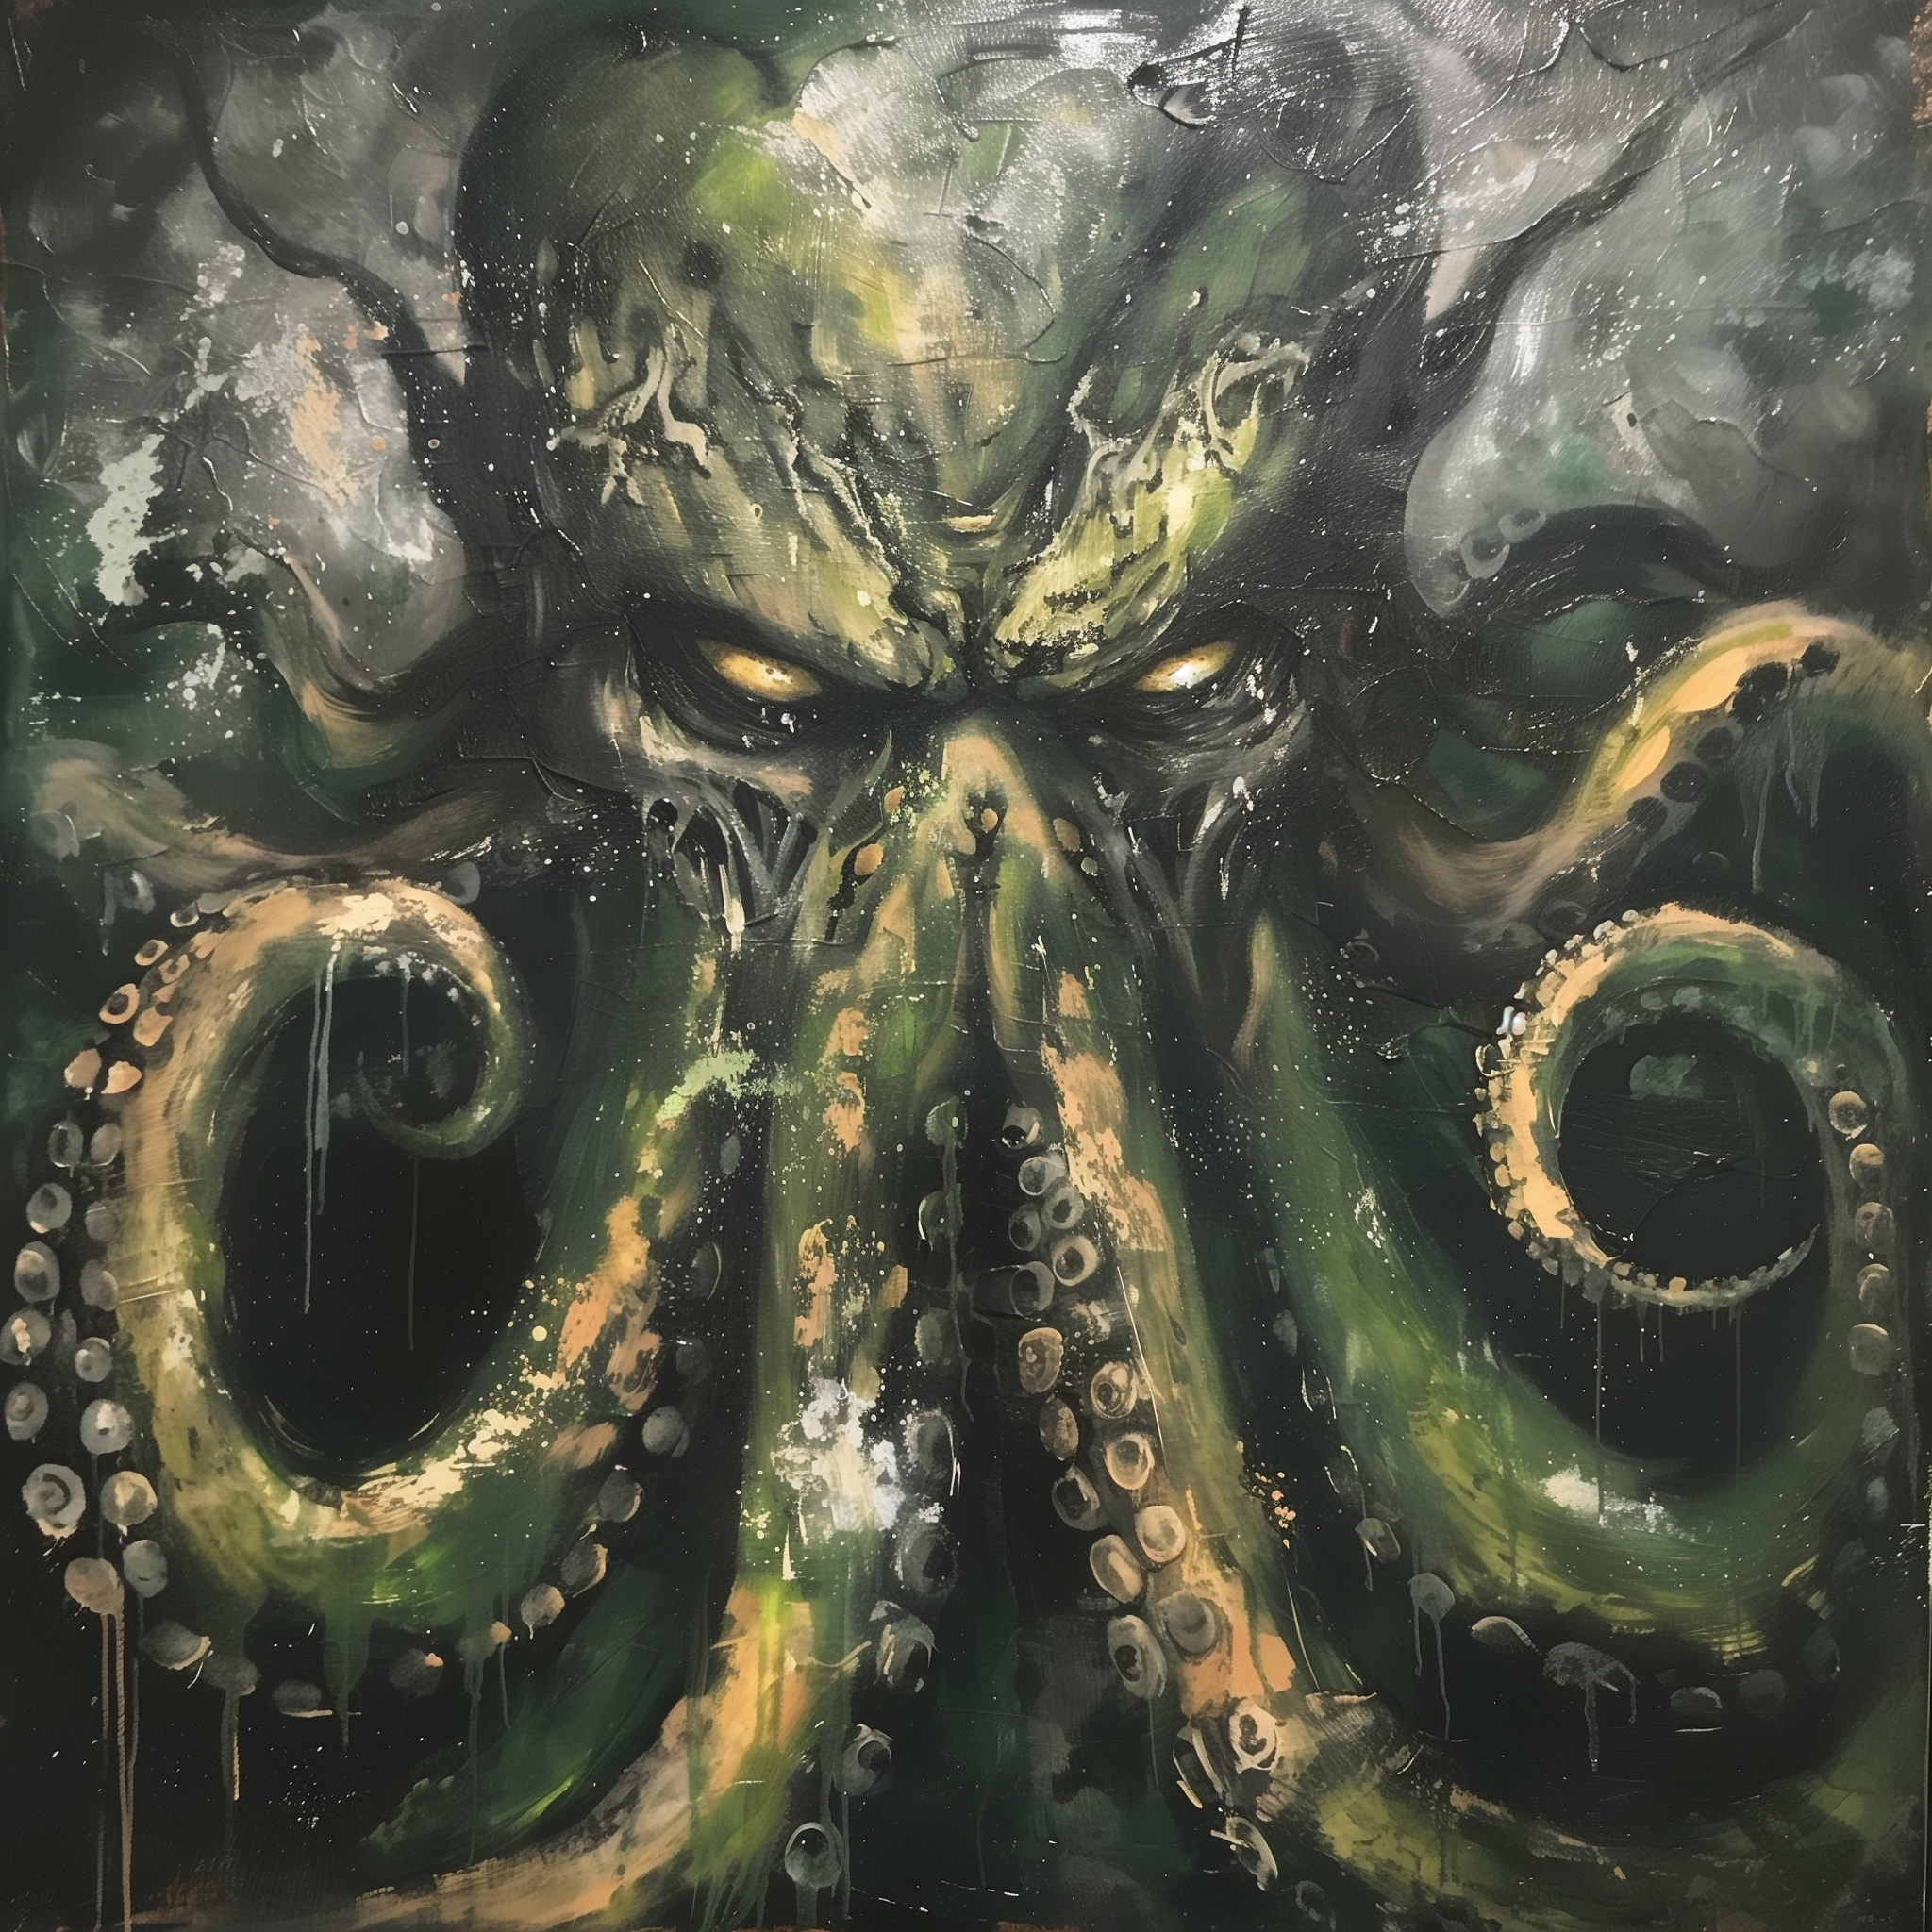 Avatar image of Cthulhu with a menacing expression, featuring prominent tentacles and intense eyes, ideal for a profile picture with a mythological theme.